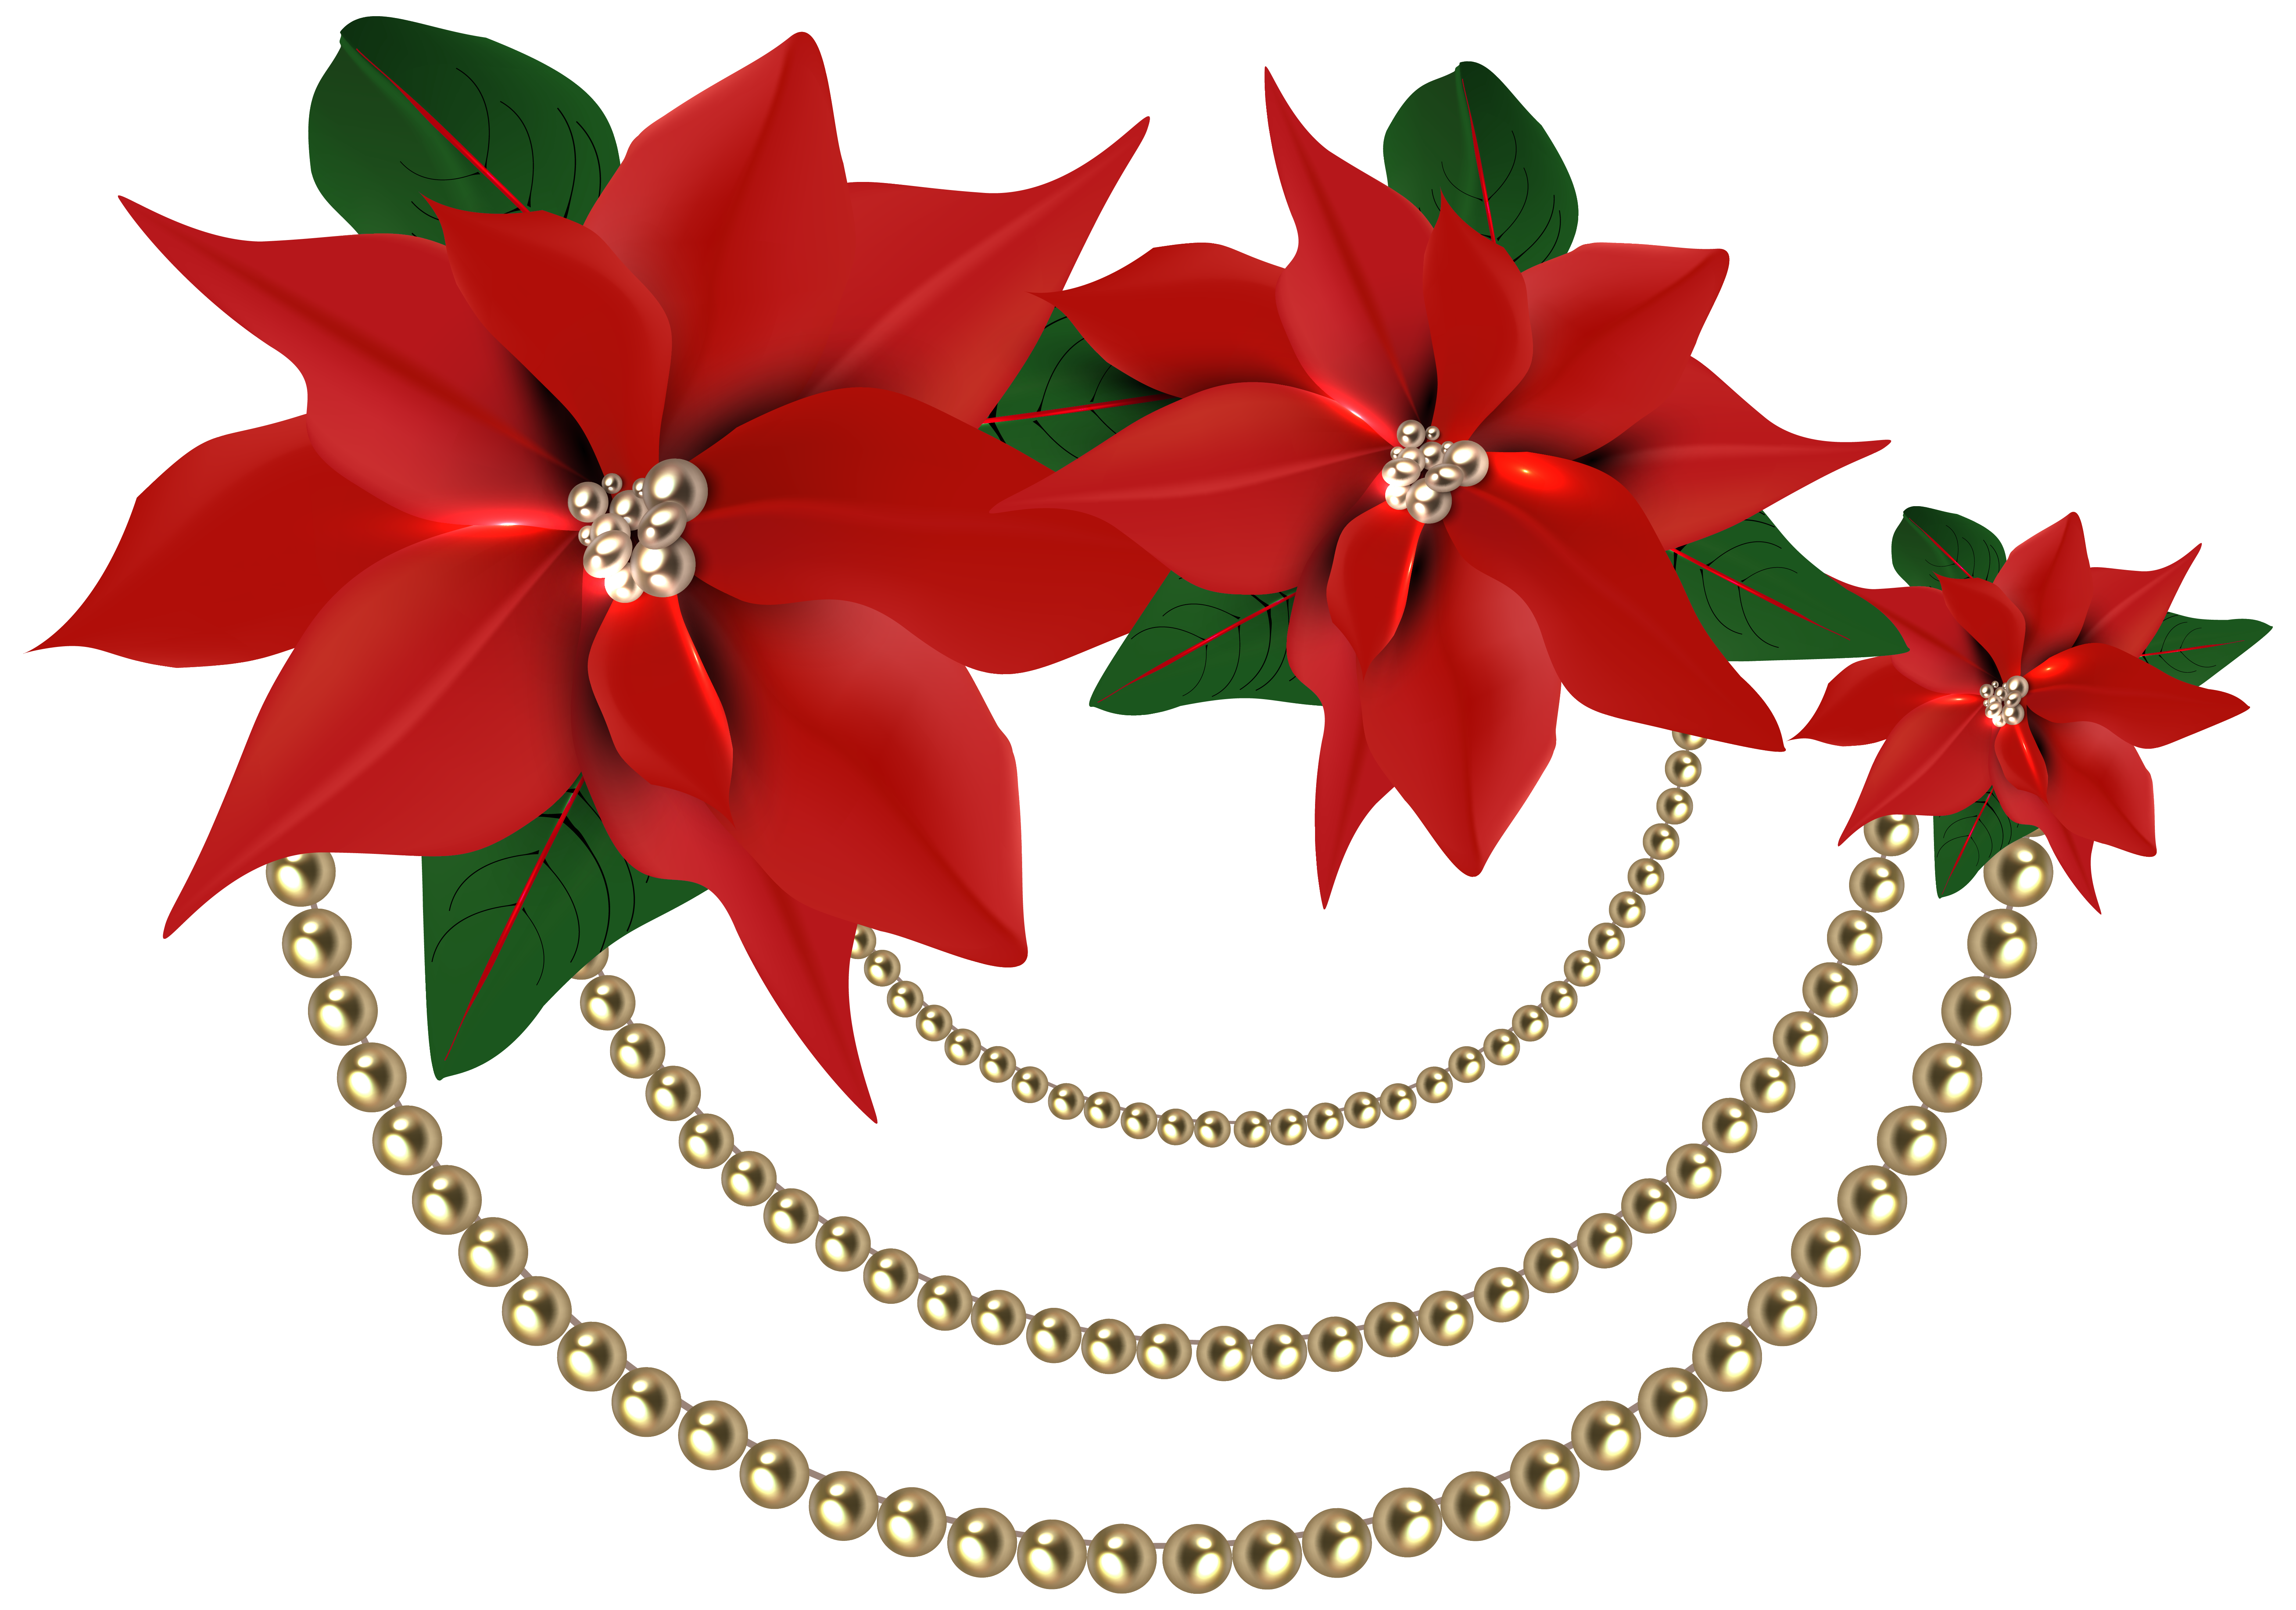 Christmas flower png. Decorative poinsettias with pearls